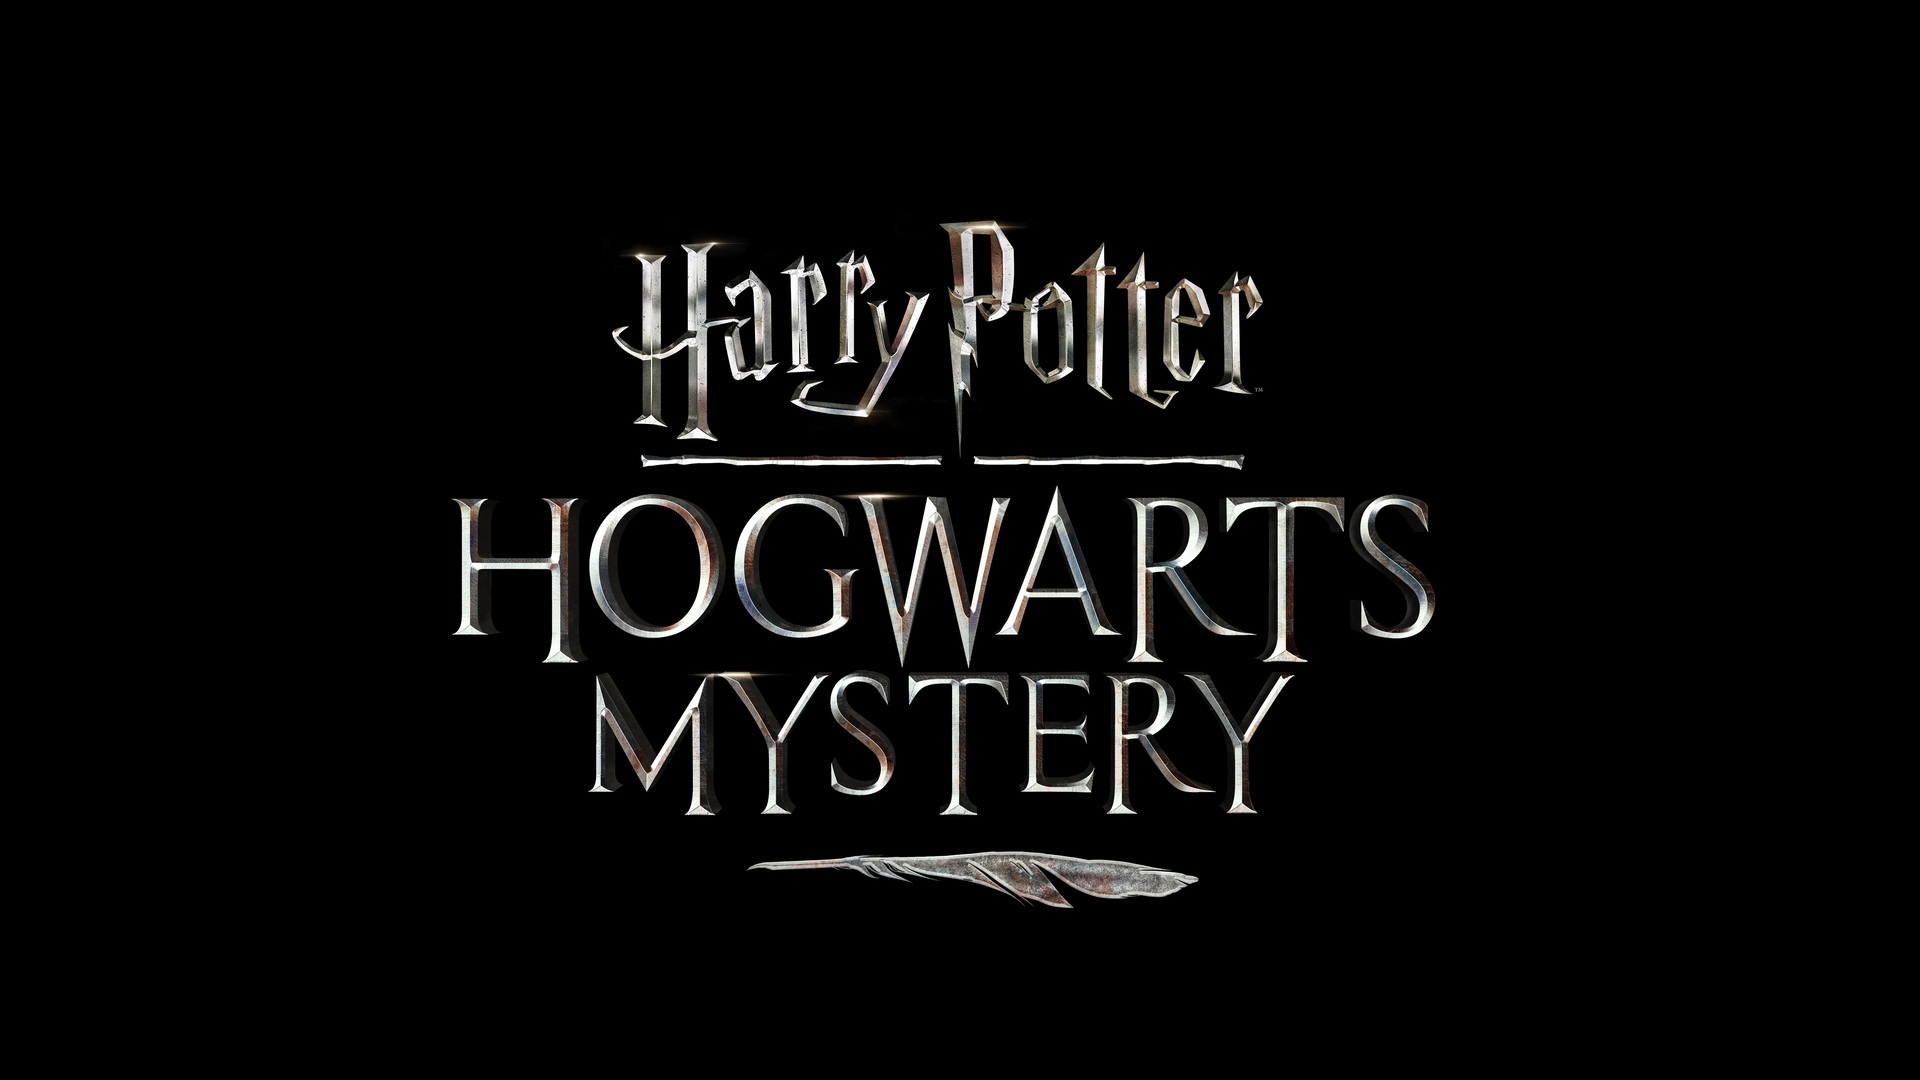 Harry Potter Hd Wallpapers 1080p